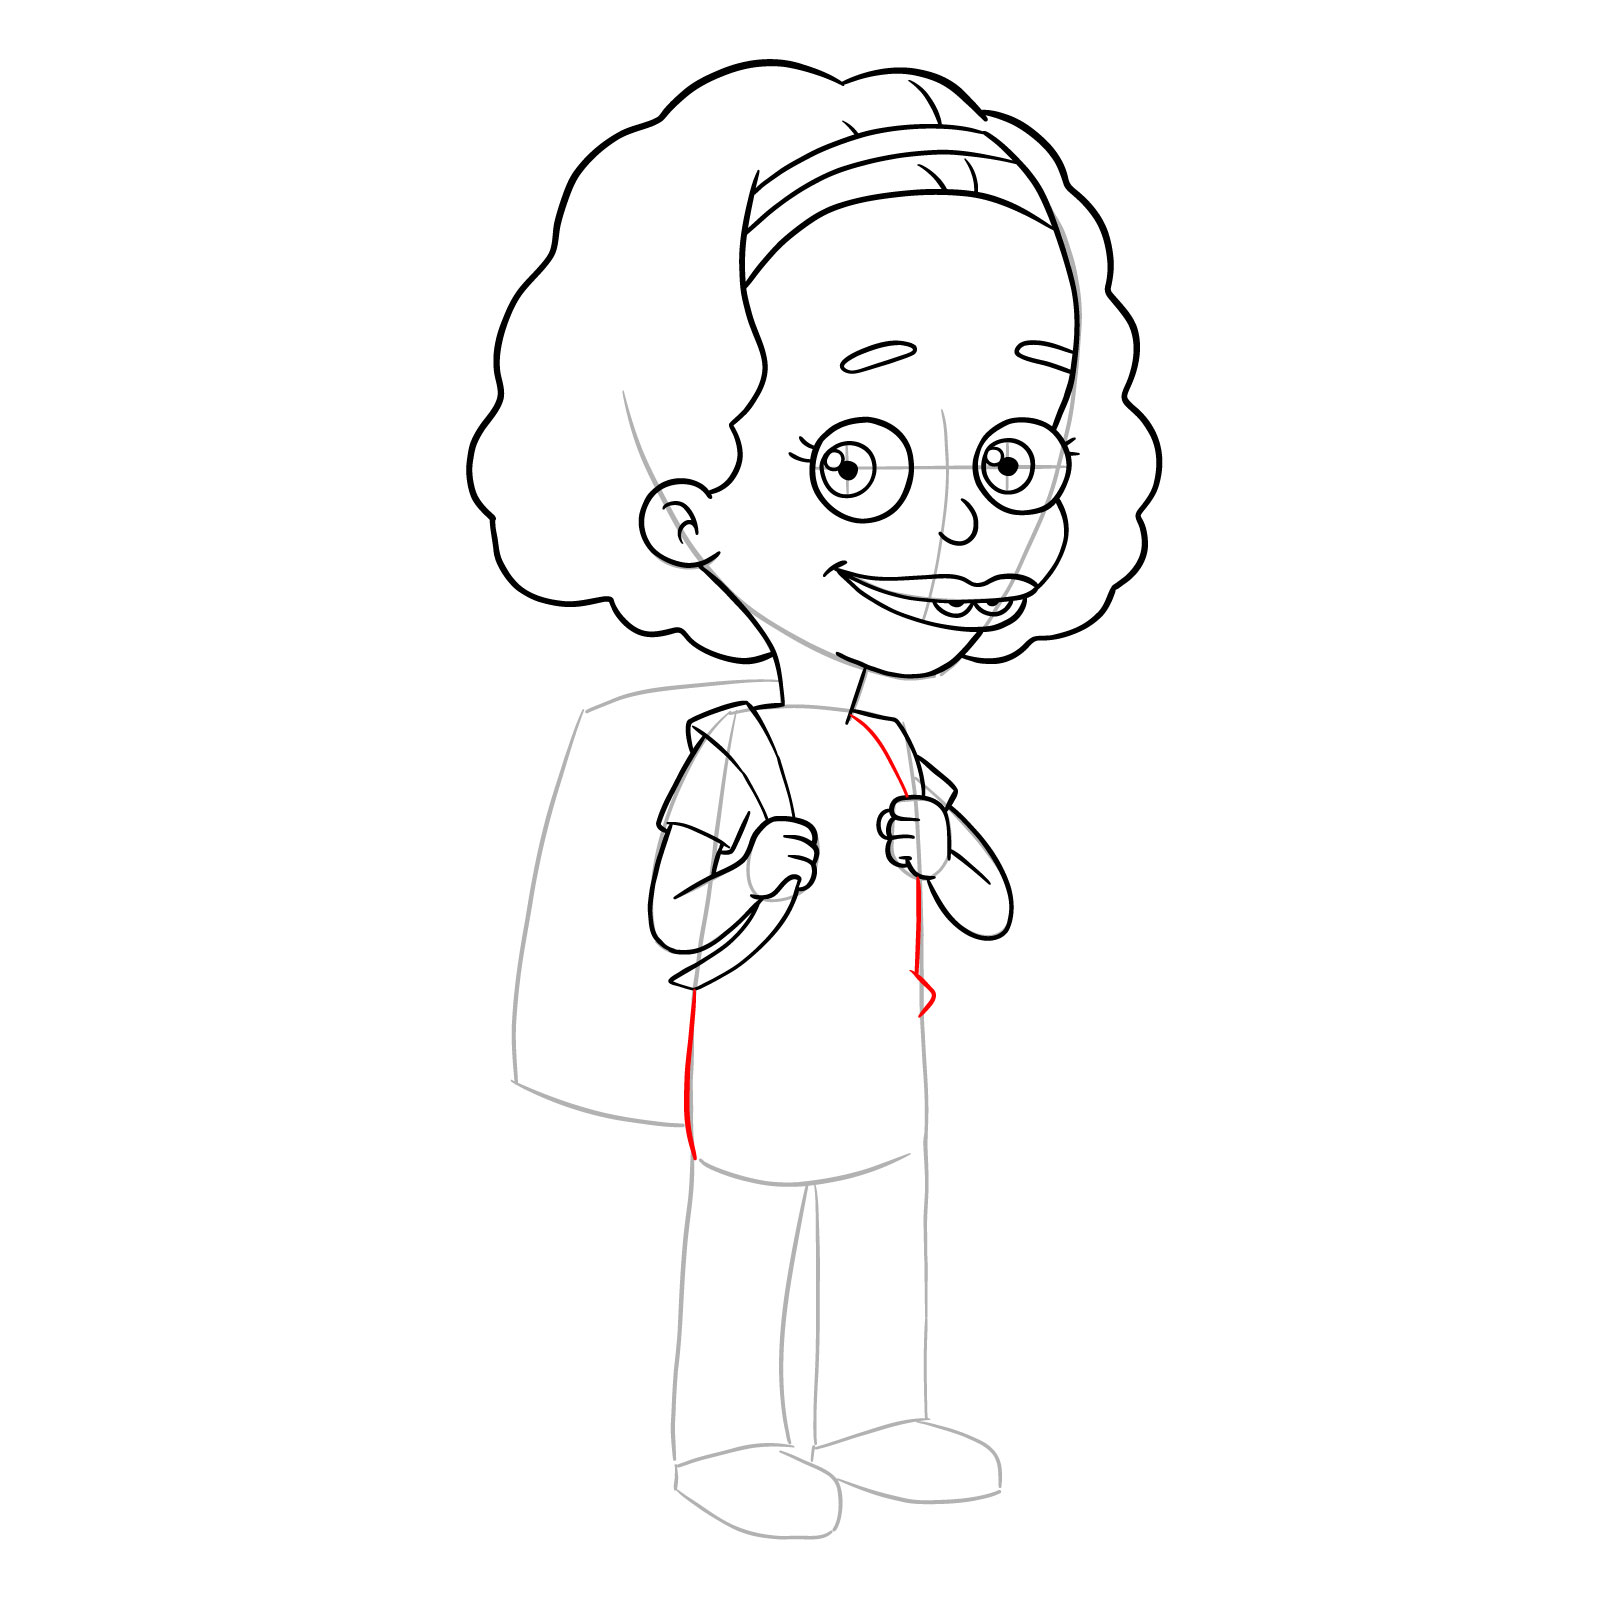 How to draw Missy from Big Mouth - step 19